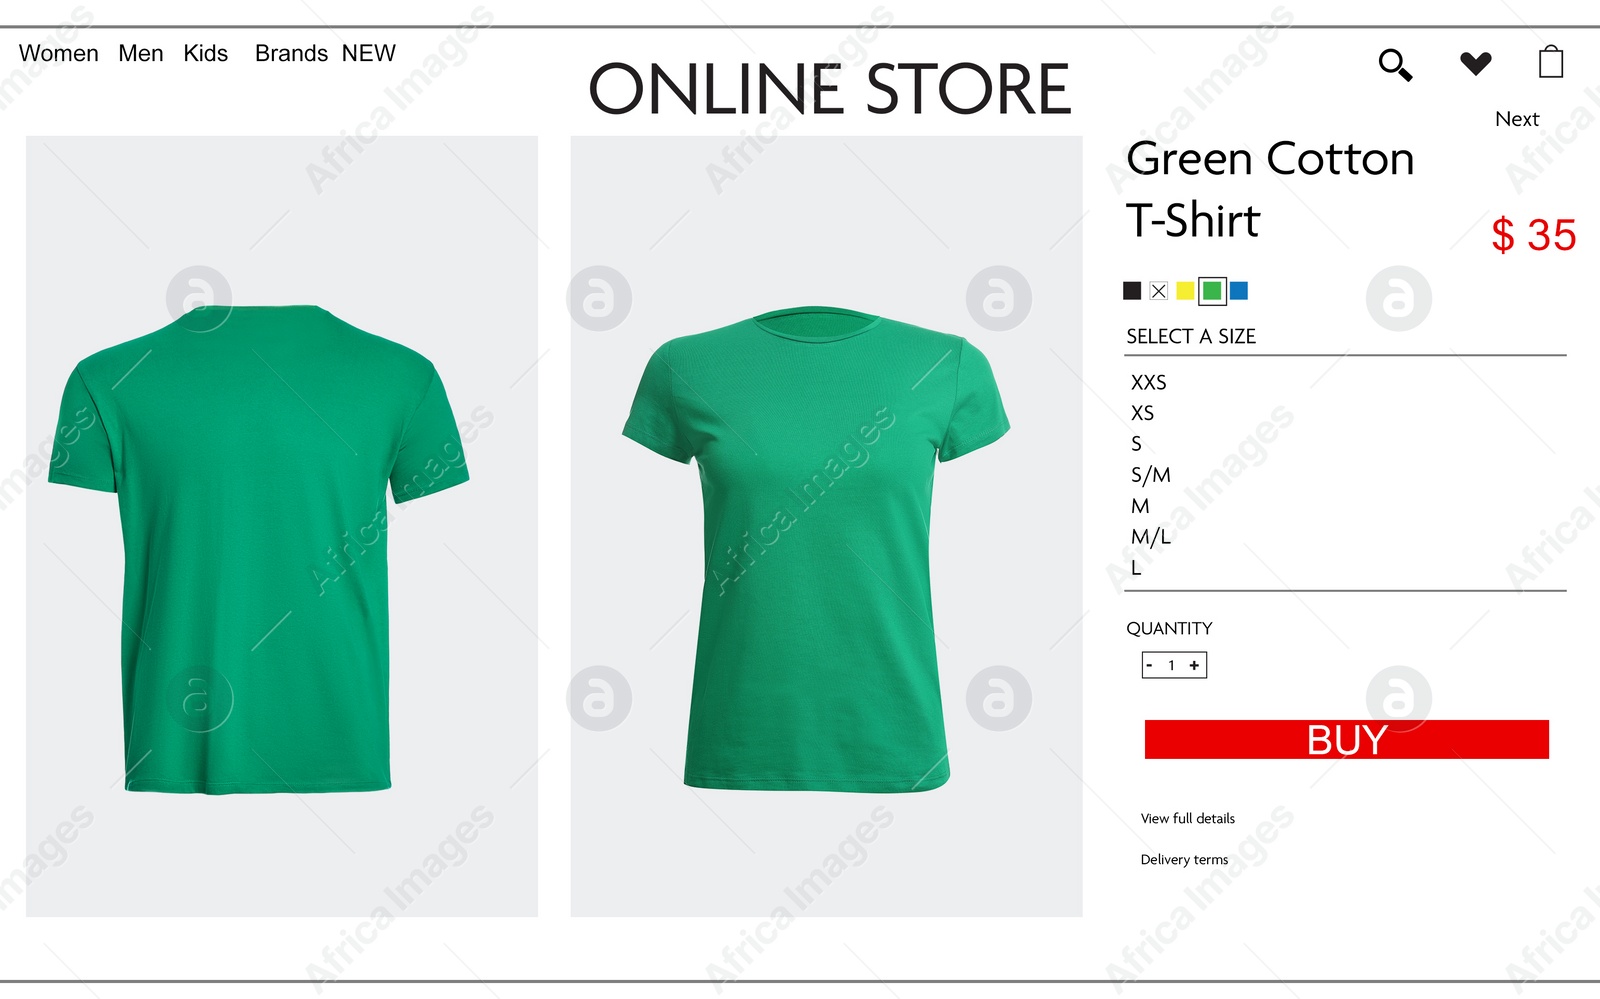 Image of Online store website page with stylish t-shirt and information. Image can be pasted onto laptop or tablet screen